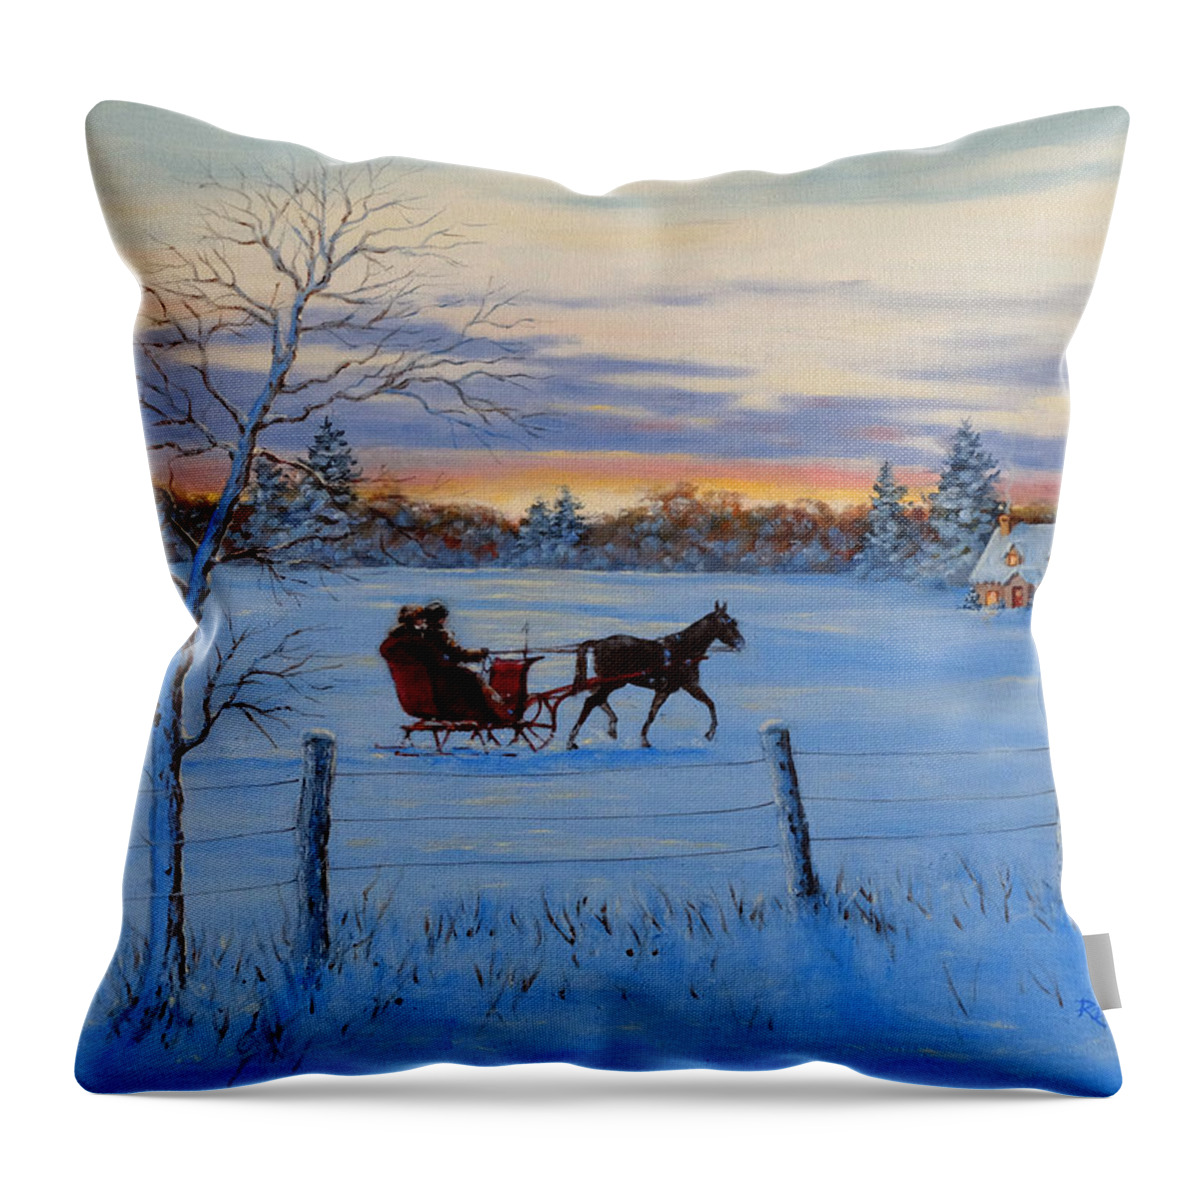 Horse Throw Pillow featuring the painting Coming Home by Richard De Wolfe